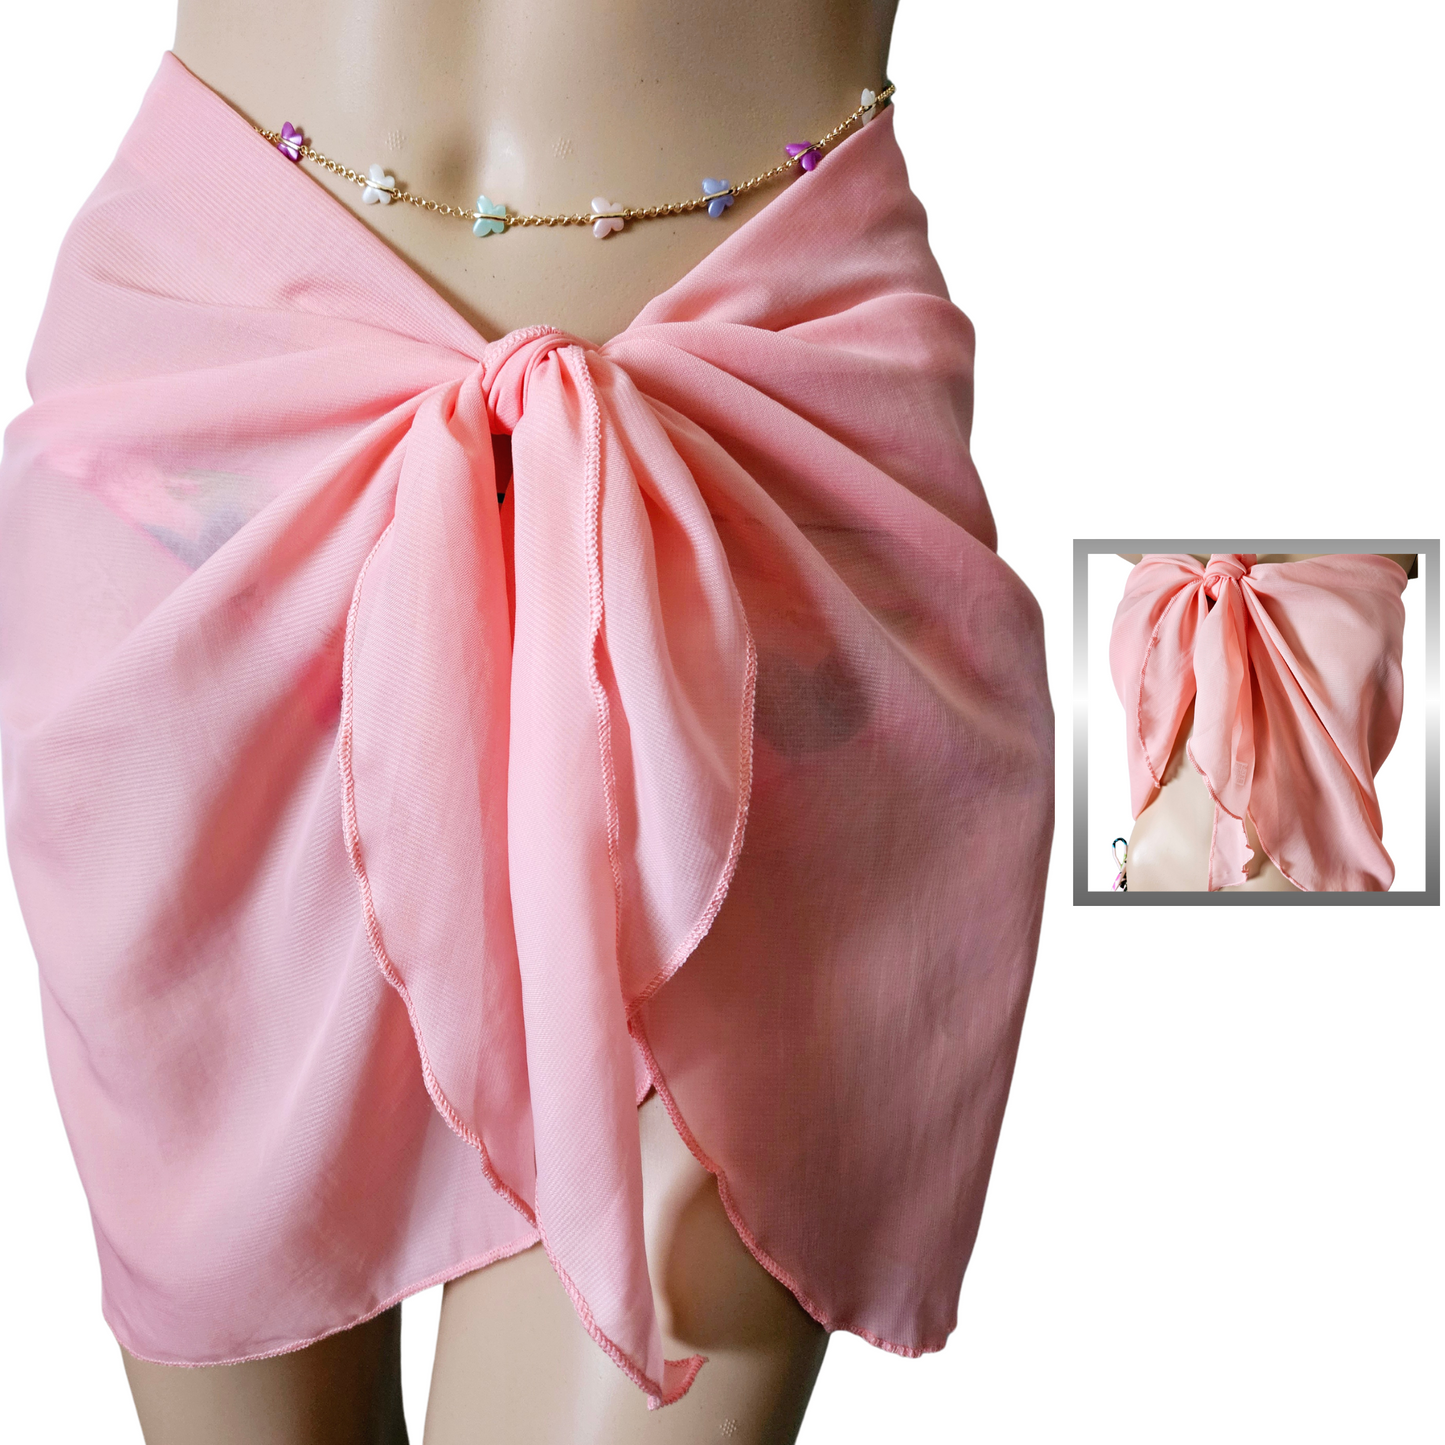 Peach Women's Swimsuit Cover Up Sarong Cover-Ups Wrap Skirt